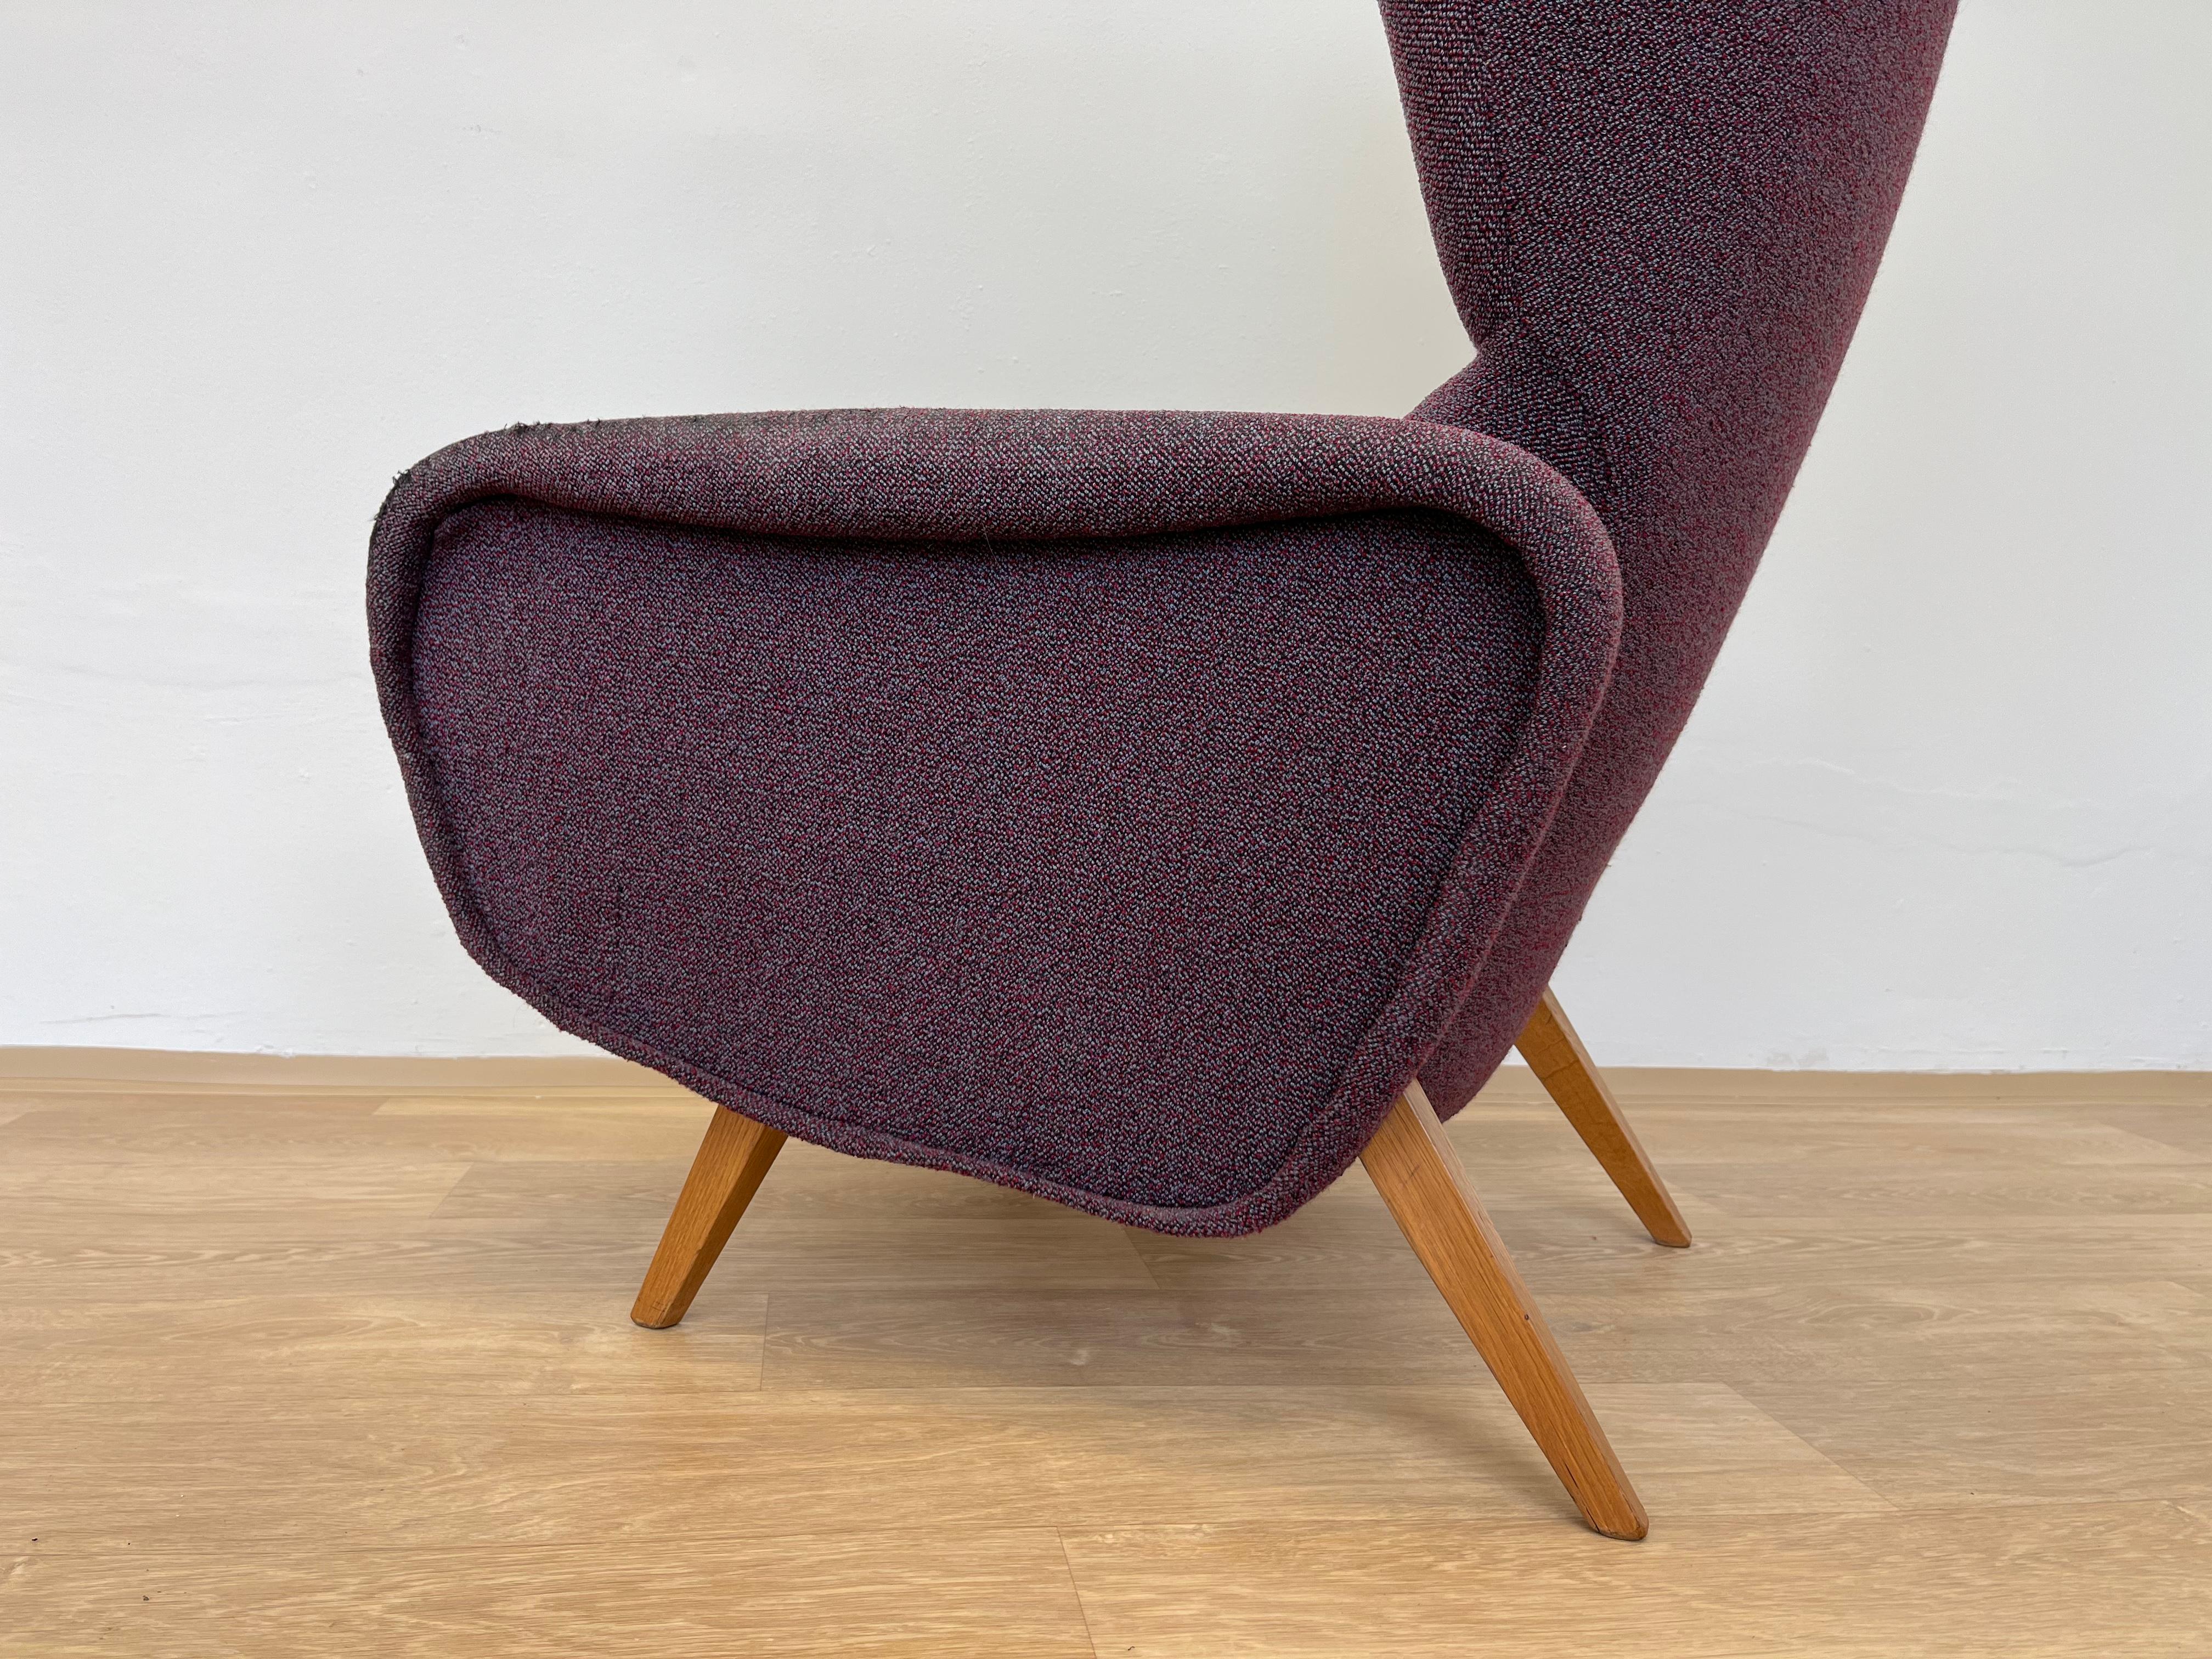 Wood Midcentury Rare Beautiful Wing Chair Inspired by Marco Zanuso, 1970s For Sale